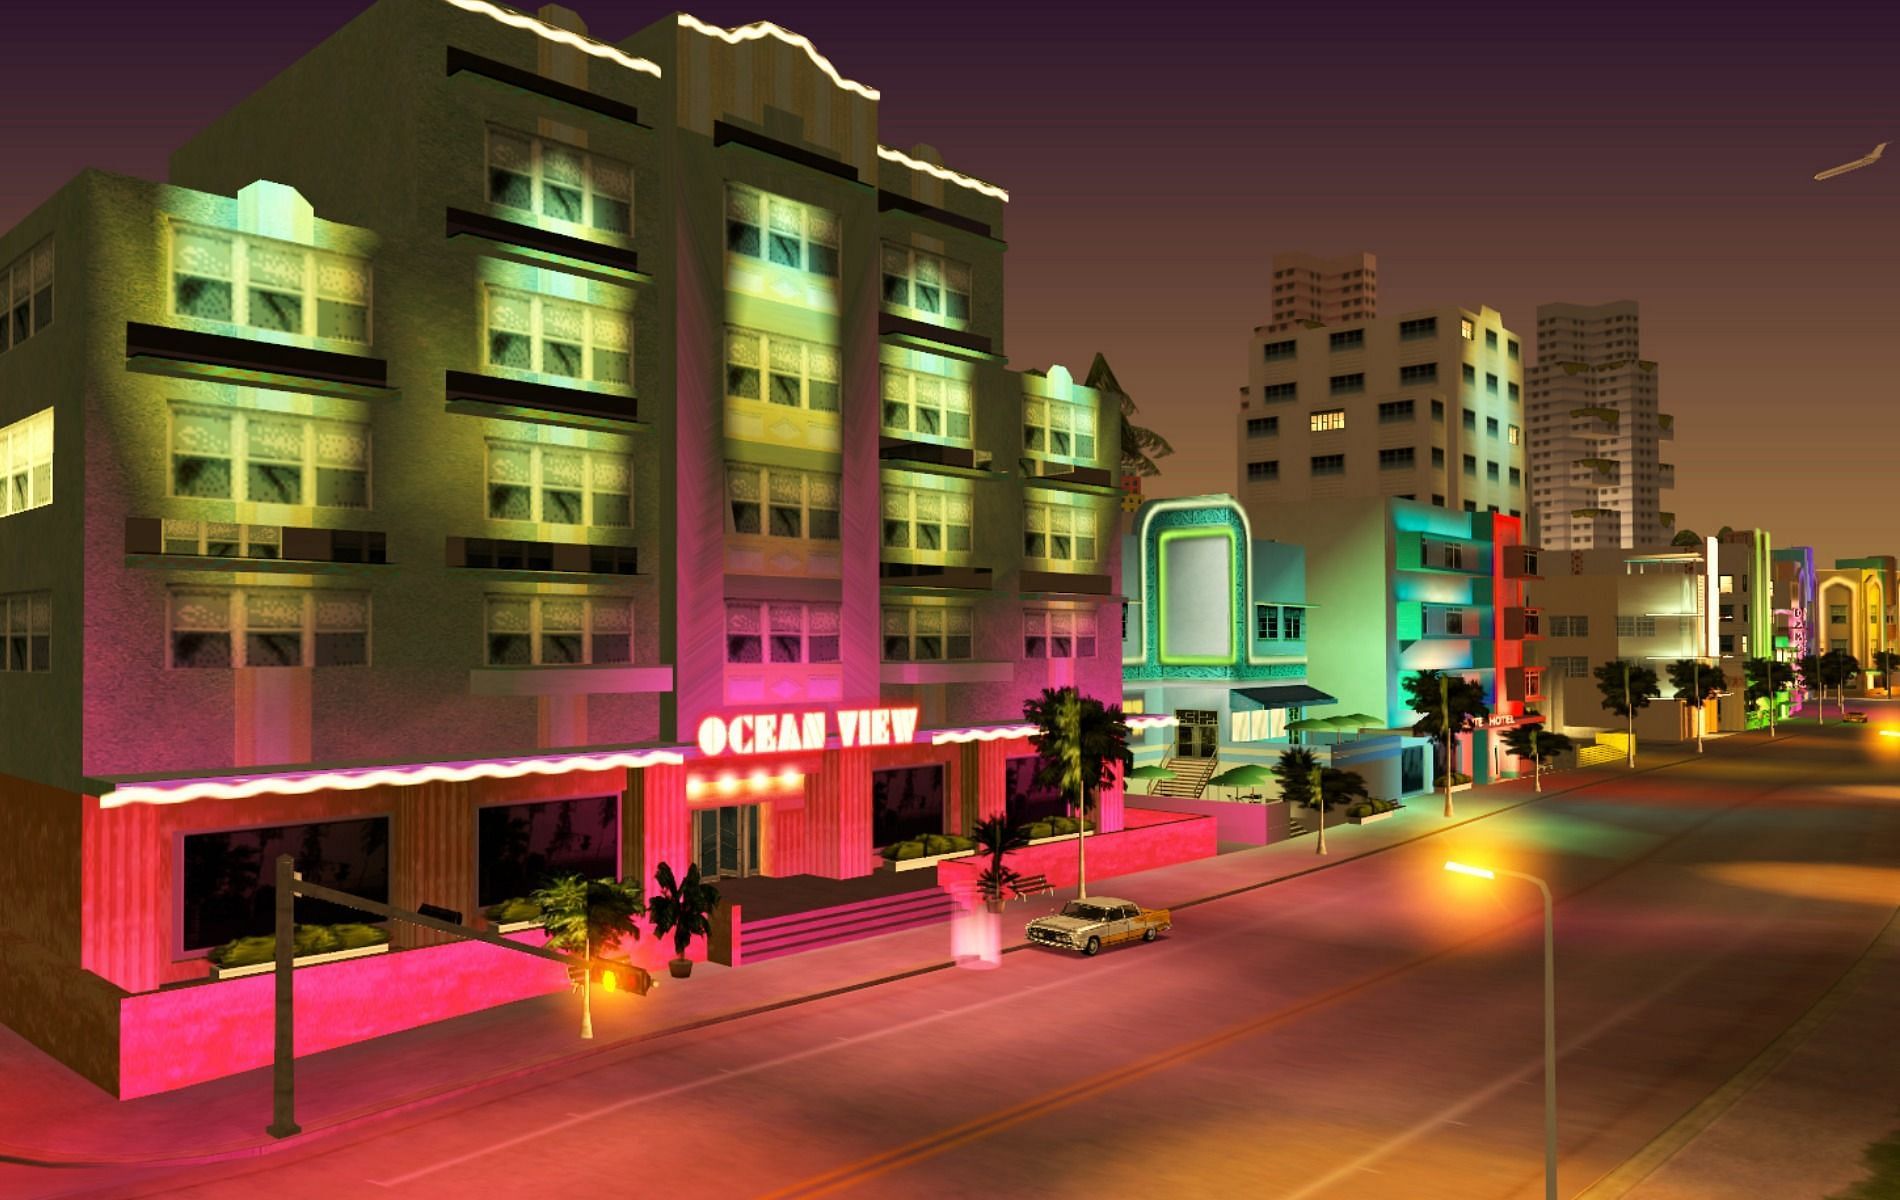 New vibrant neon lights in the PC version of GTA Vice City (Image via MixMods)